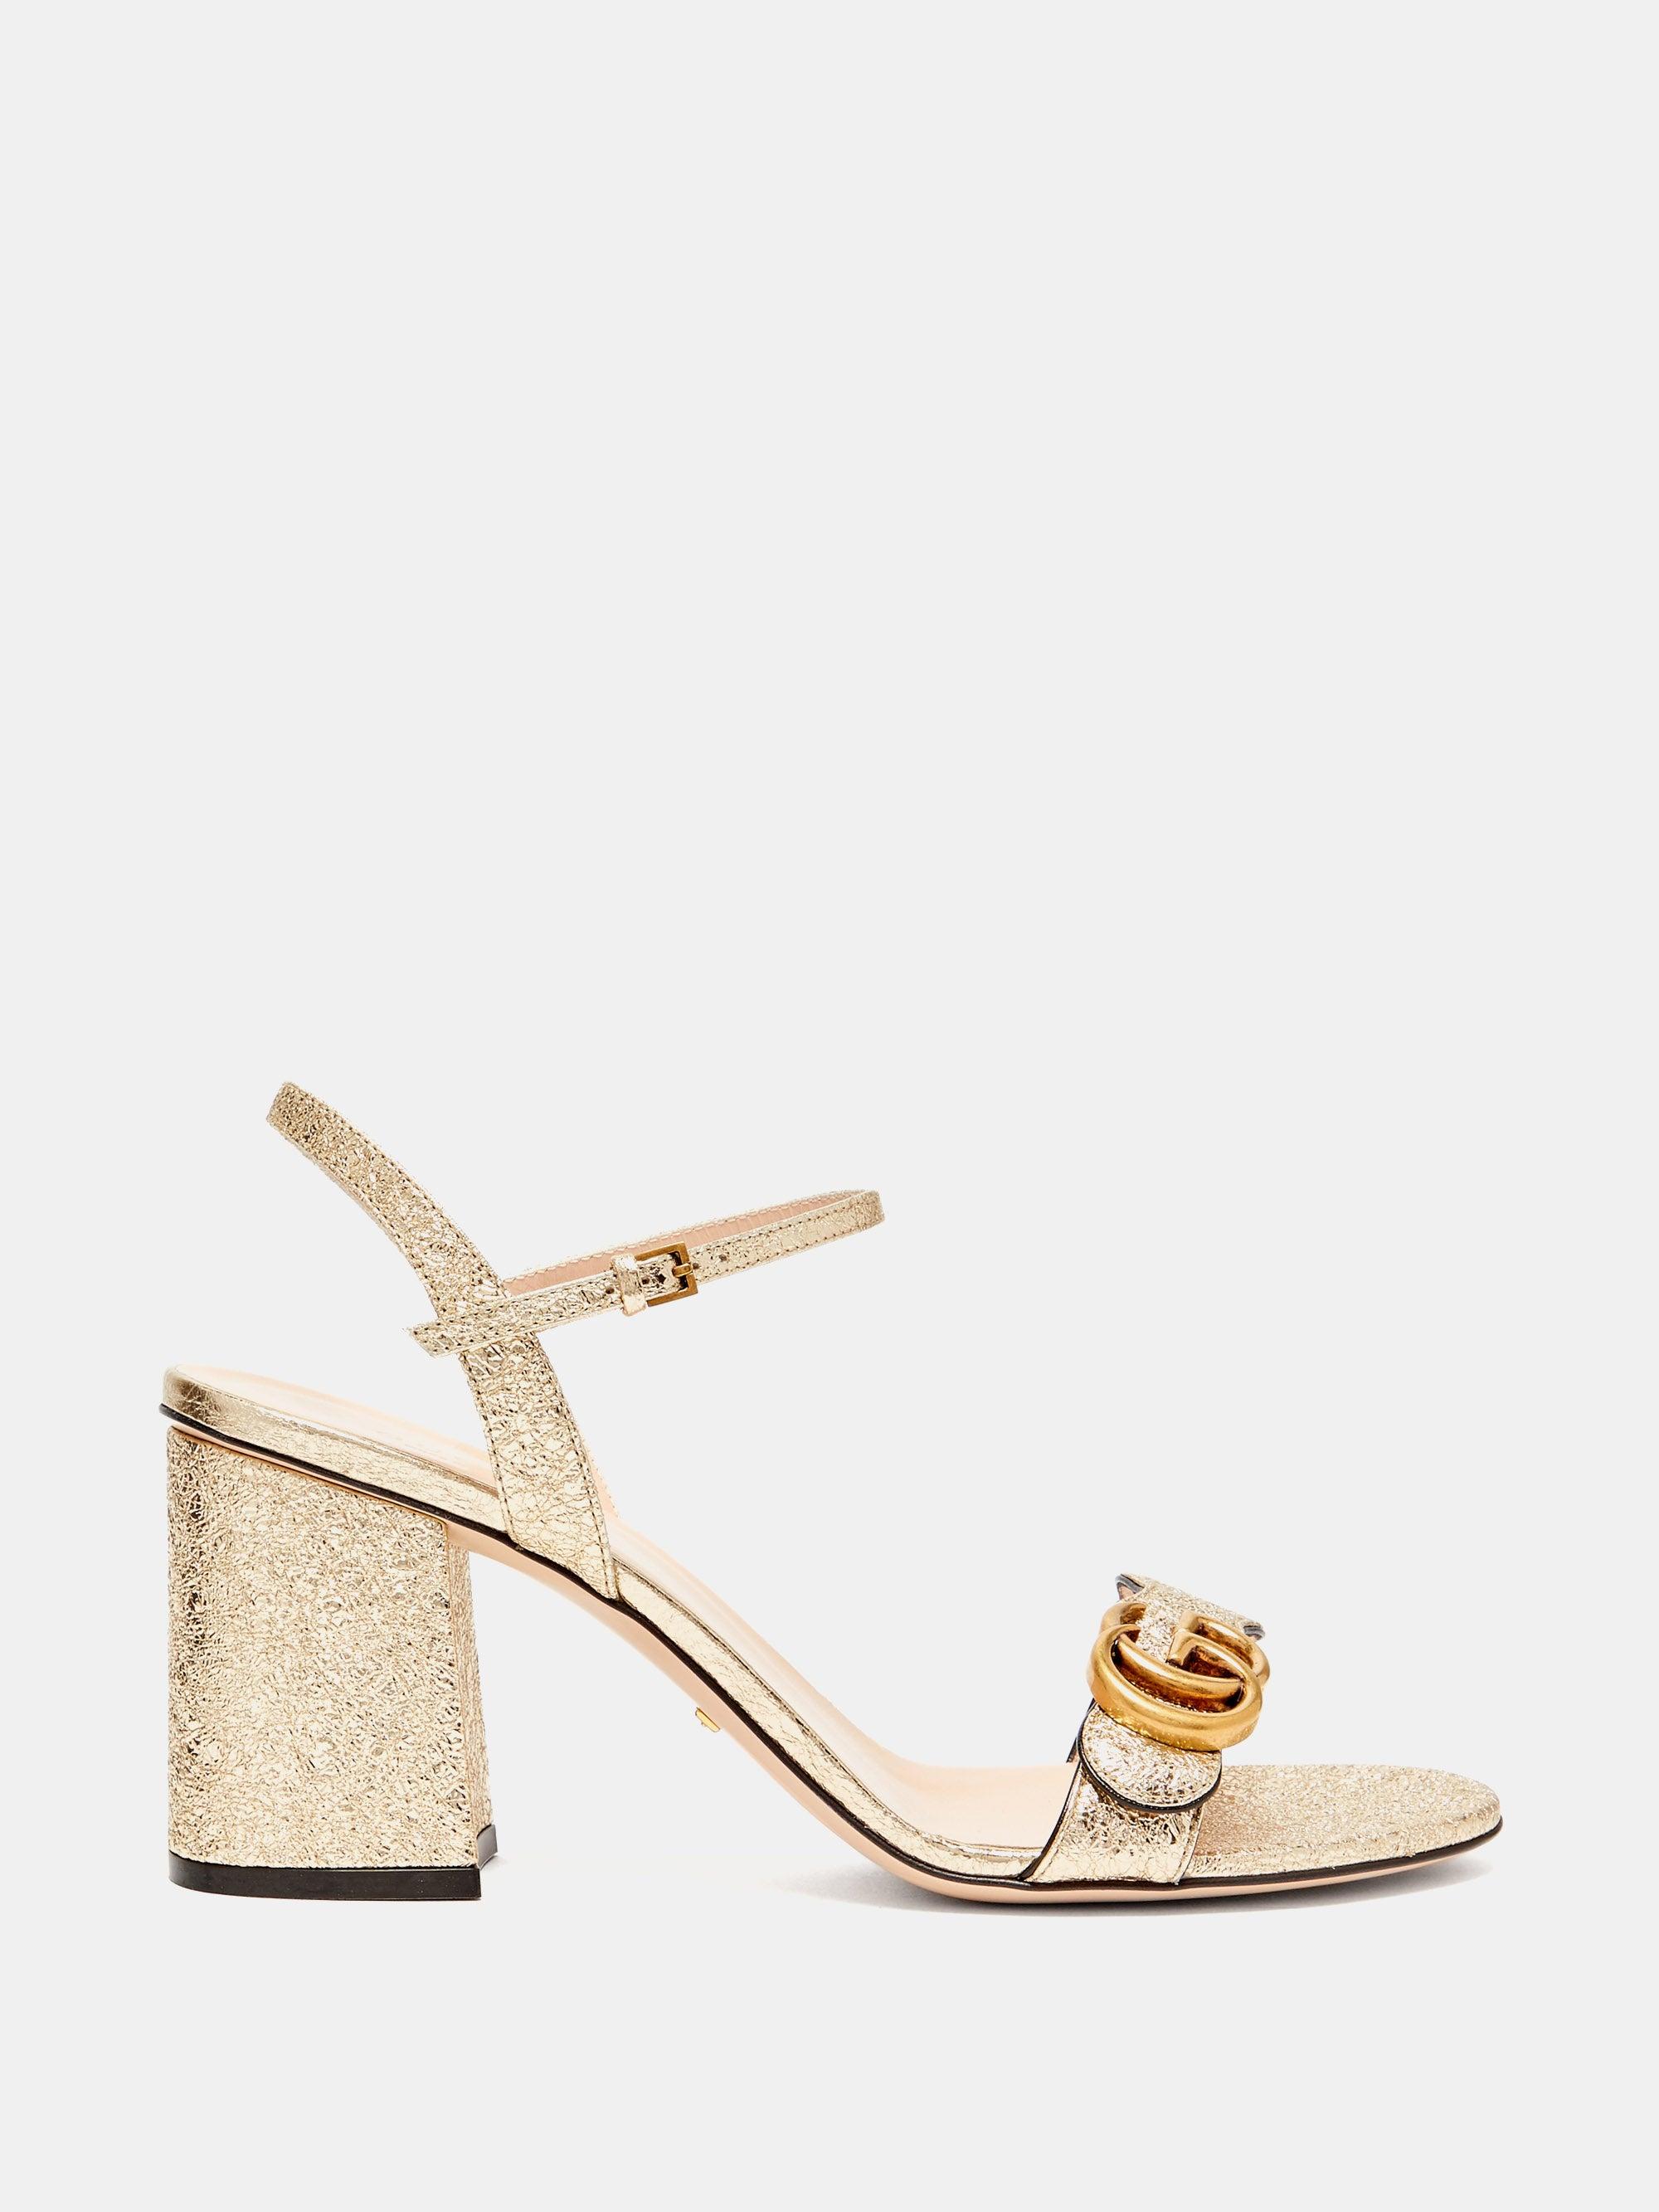 Gucci GG Marmont Block-heel Metallic-leather Sandals in Natural | Lyst